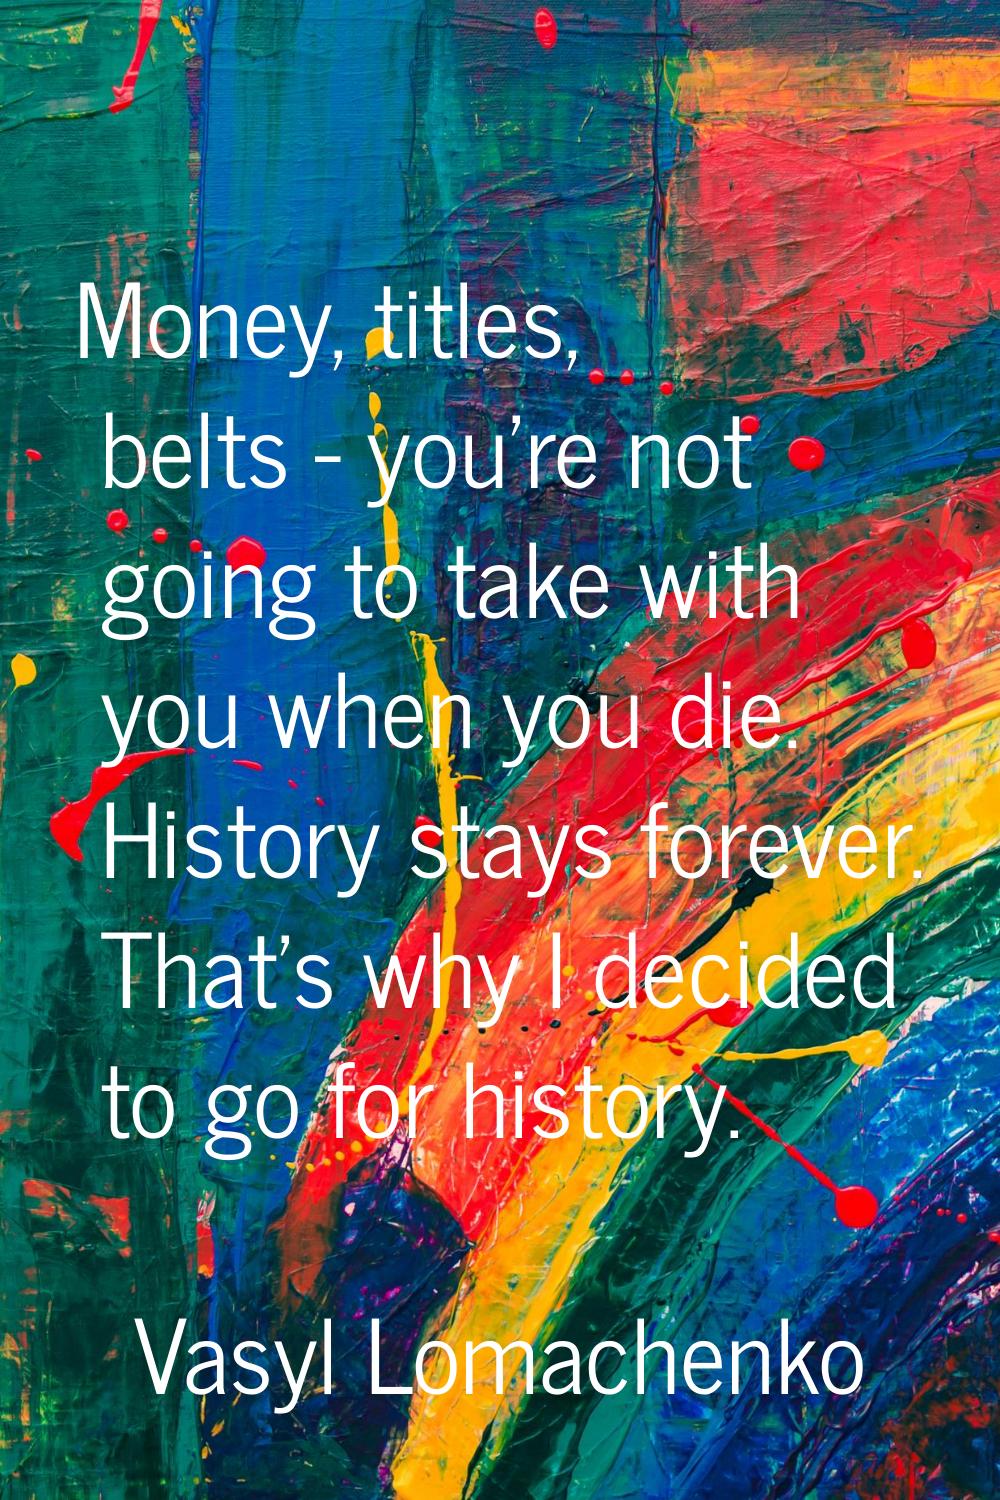 Money, titles, belts - you're not going to take with you when you die. History stays forever. That'